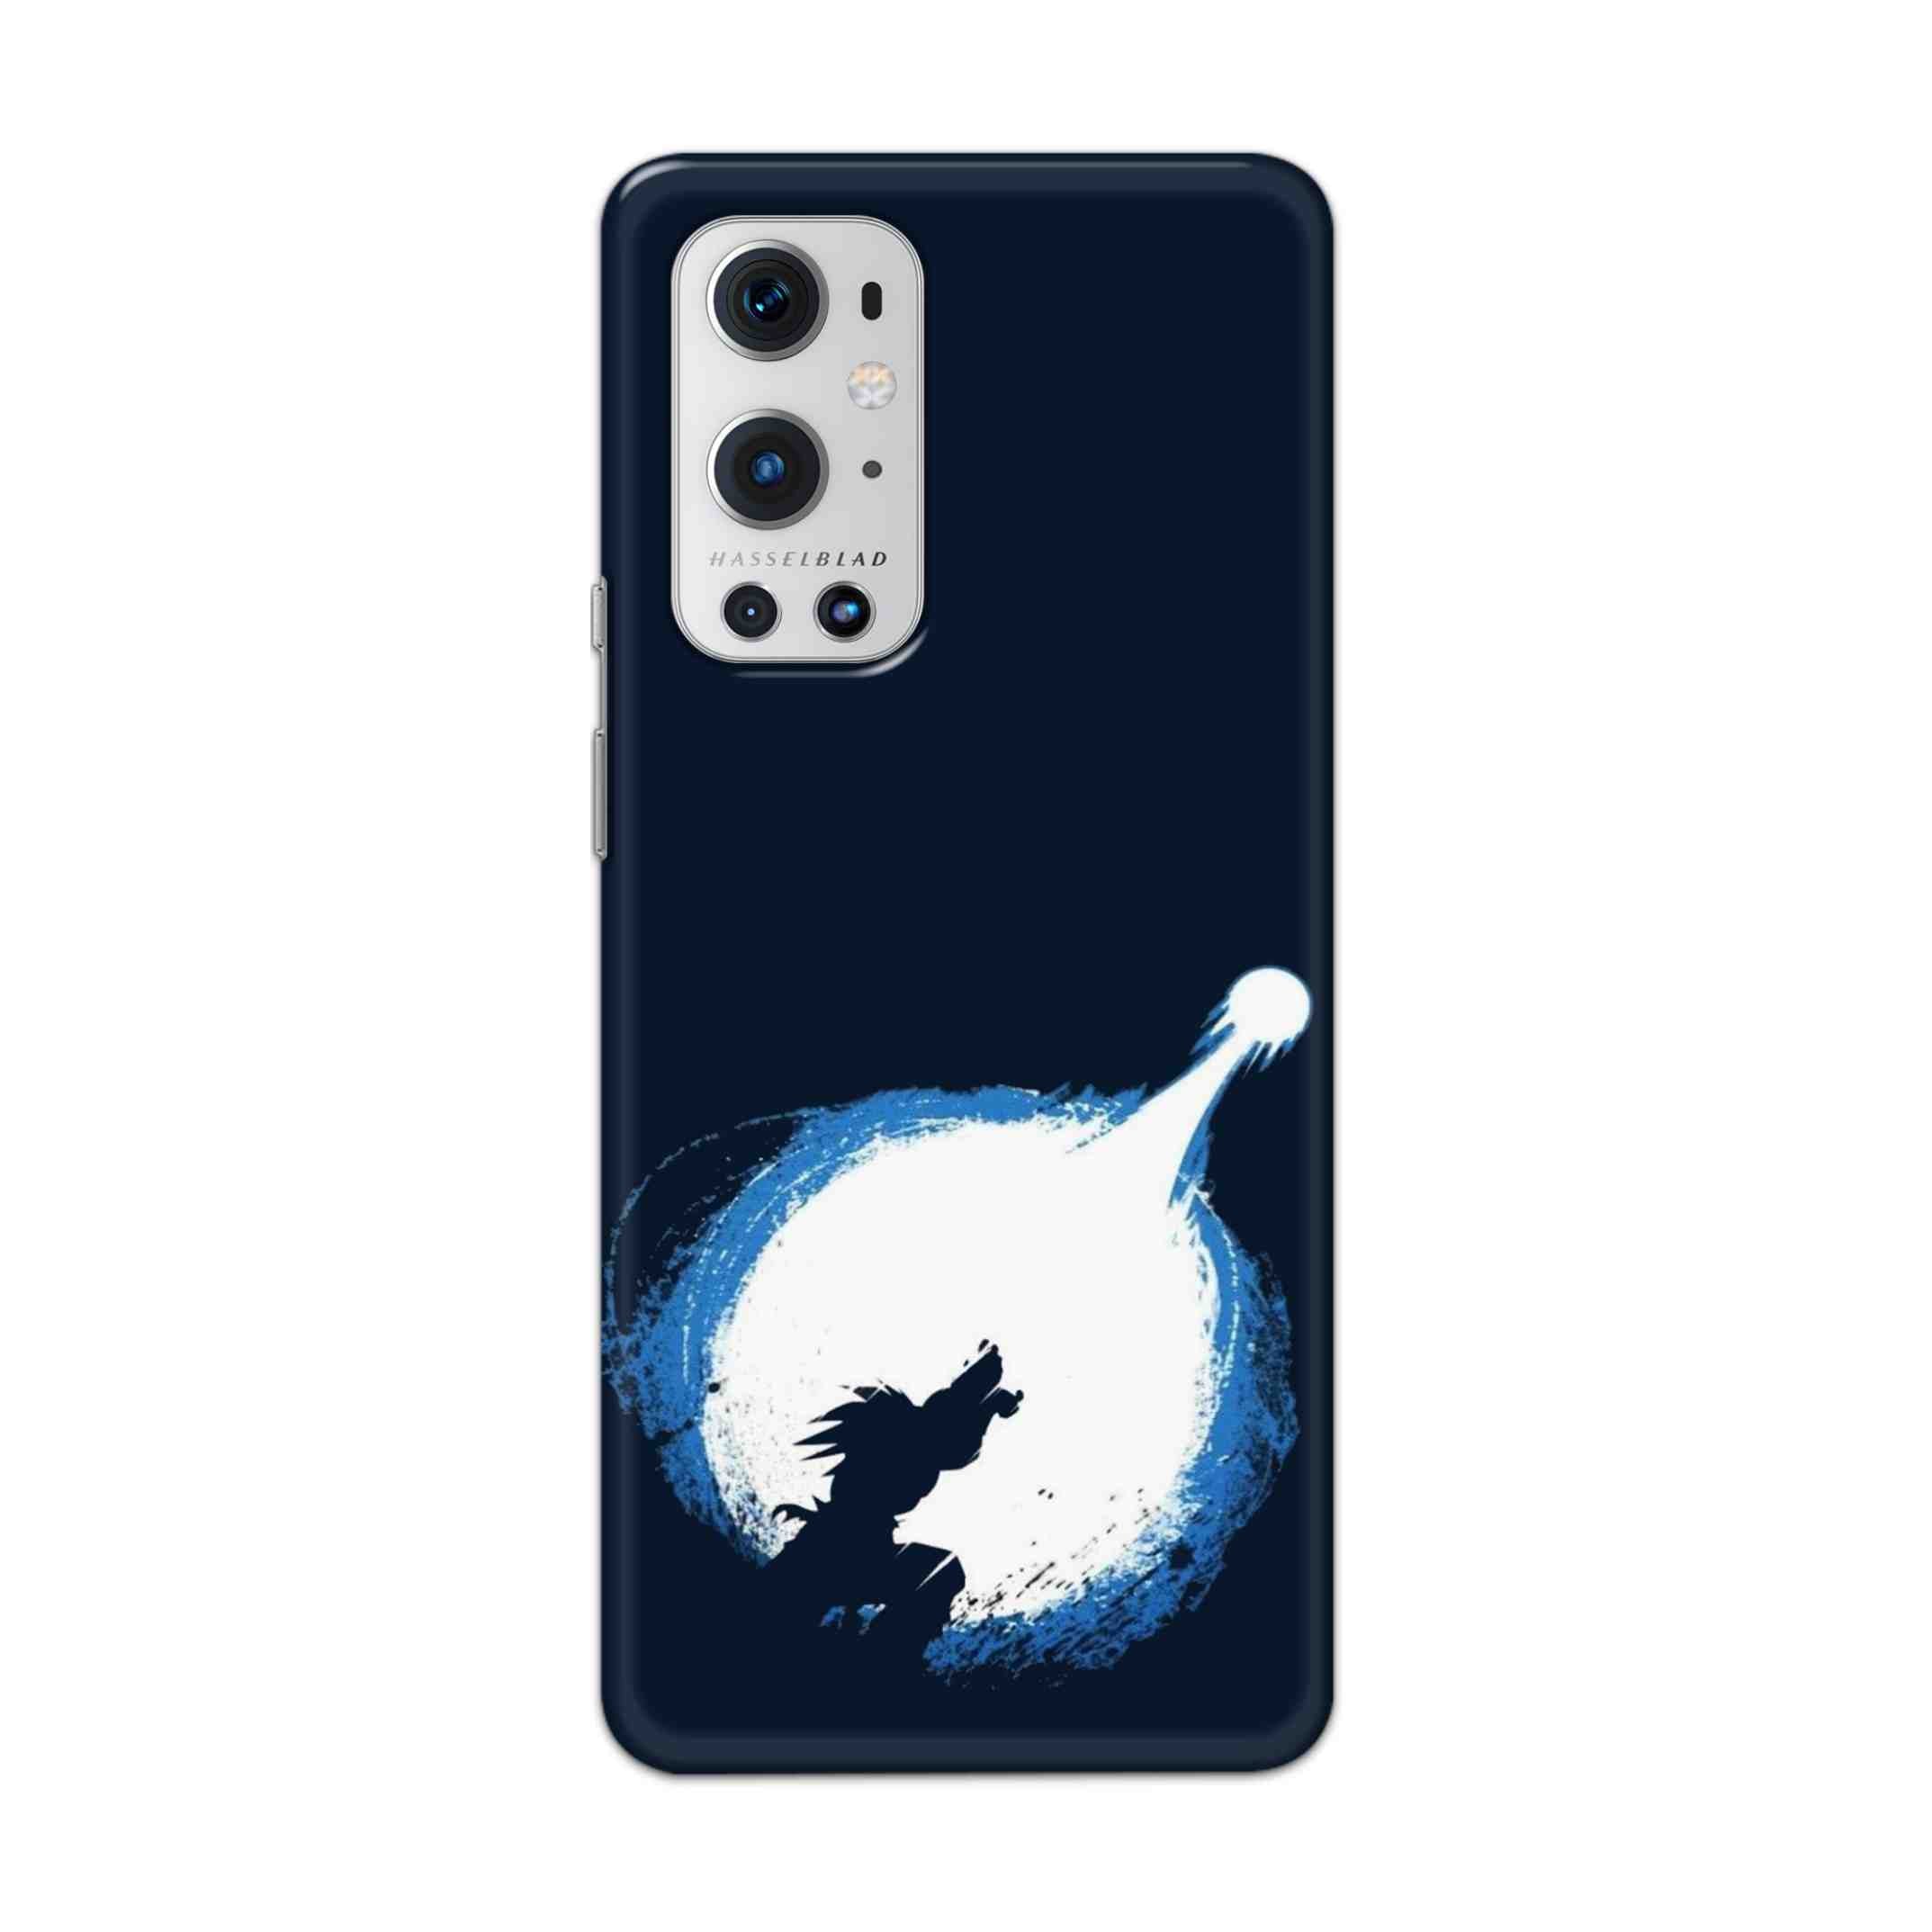 Buy Goku Power Hard Back Mobile Phone Case Cover For OnePlus 9 Pro Online